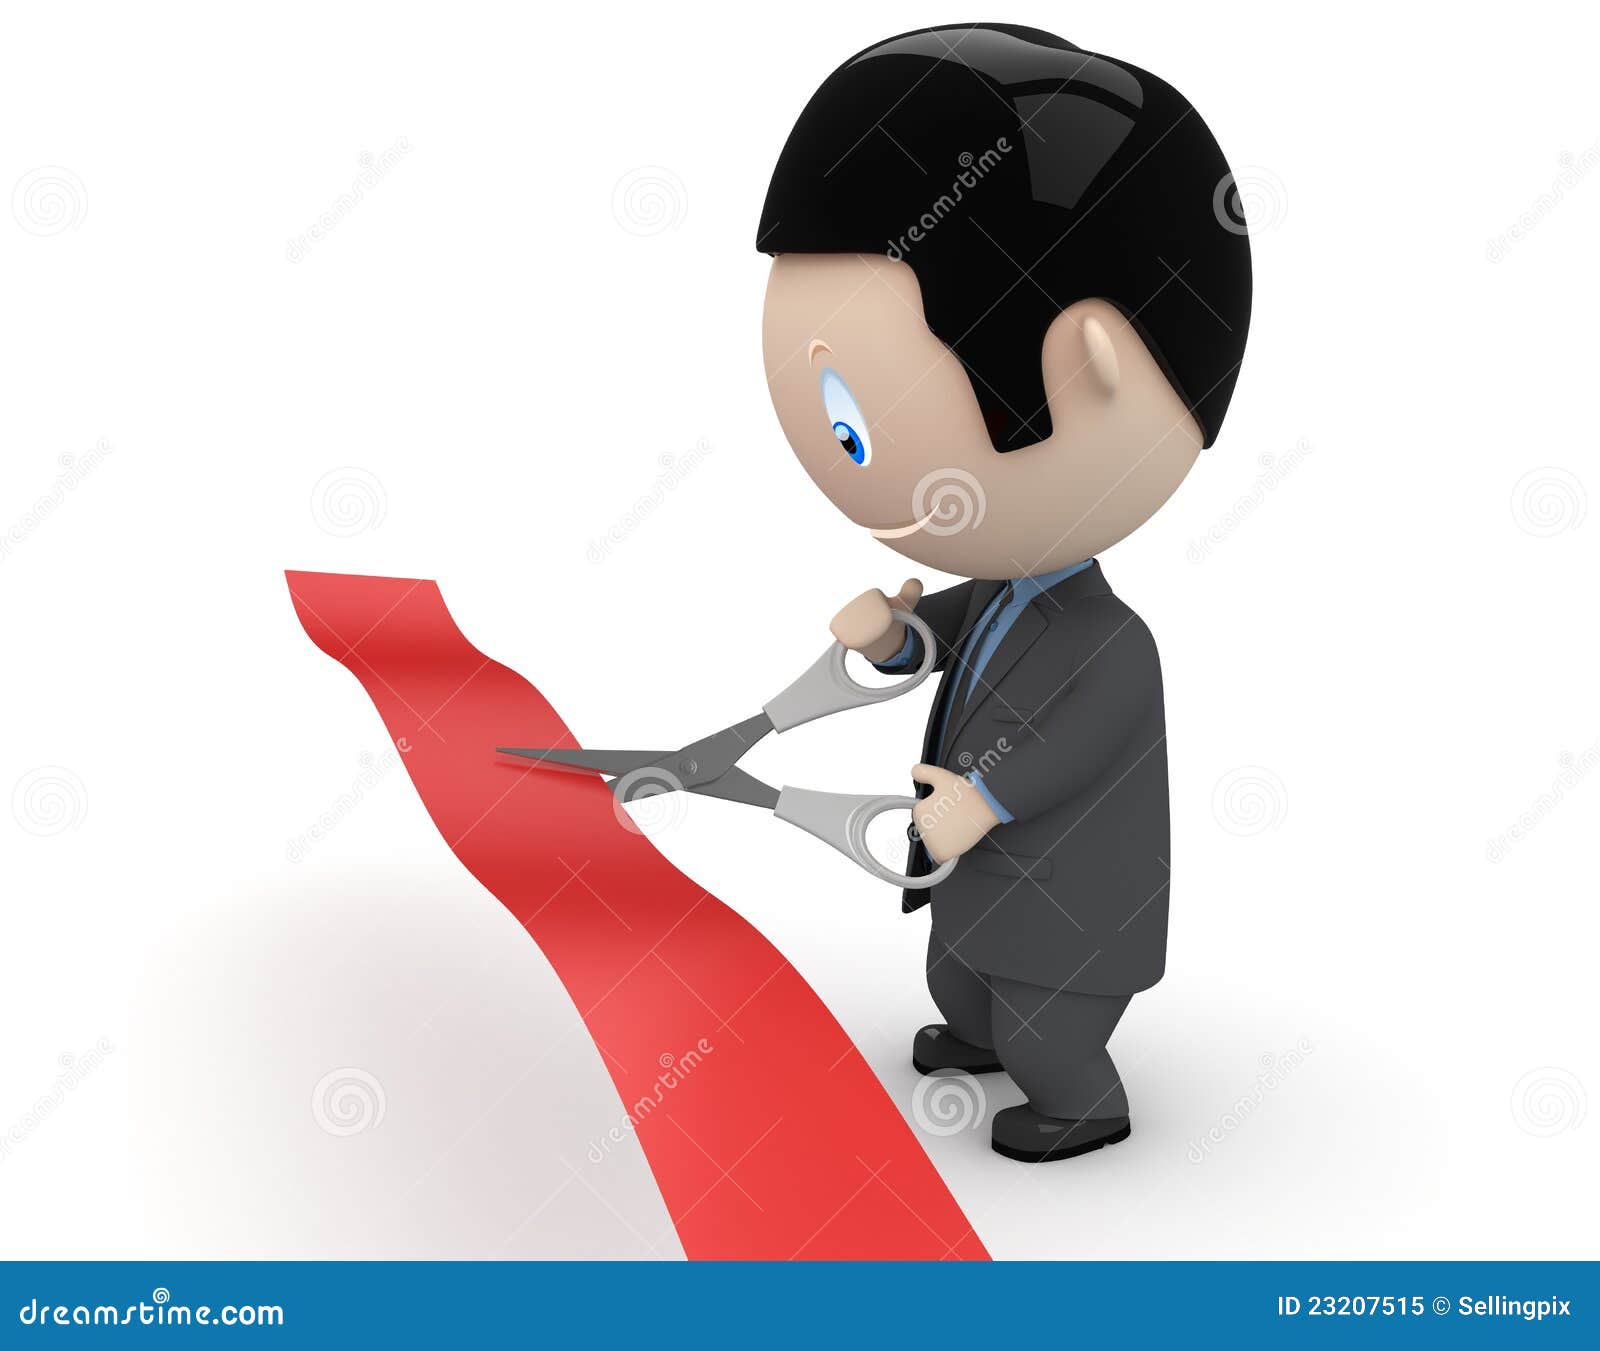 unveiling! businessman in suit cutting red ribbon